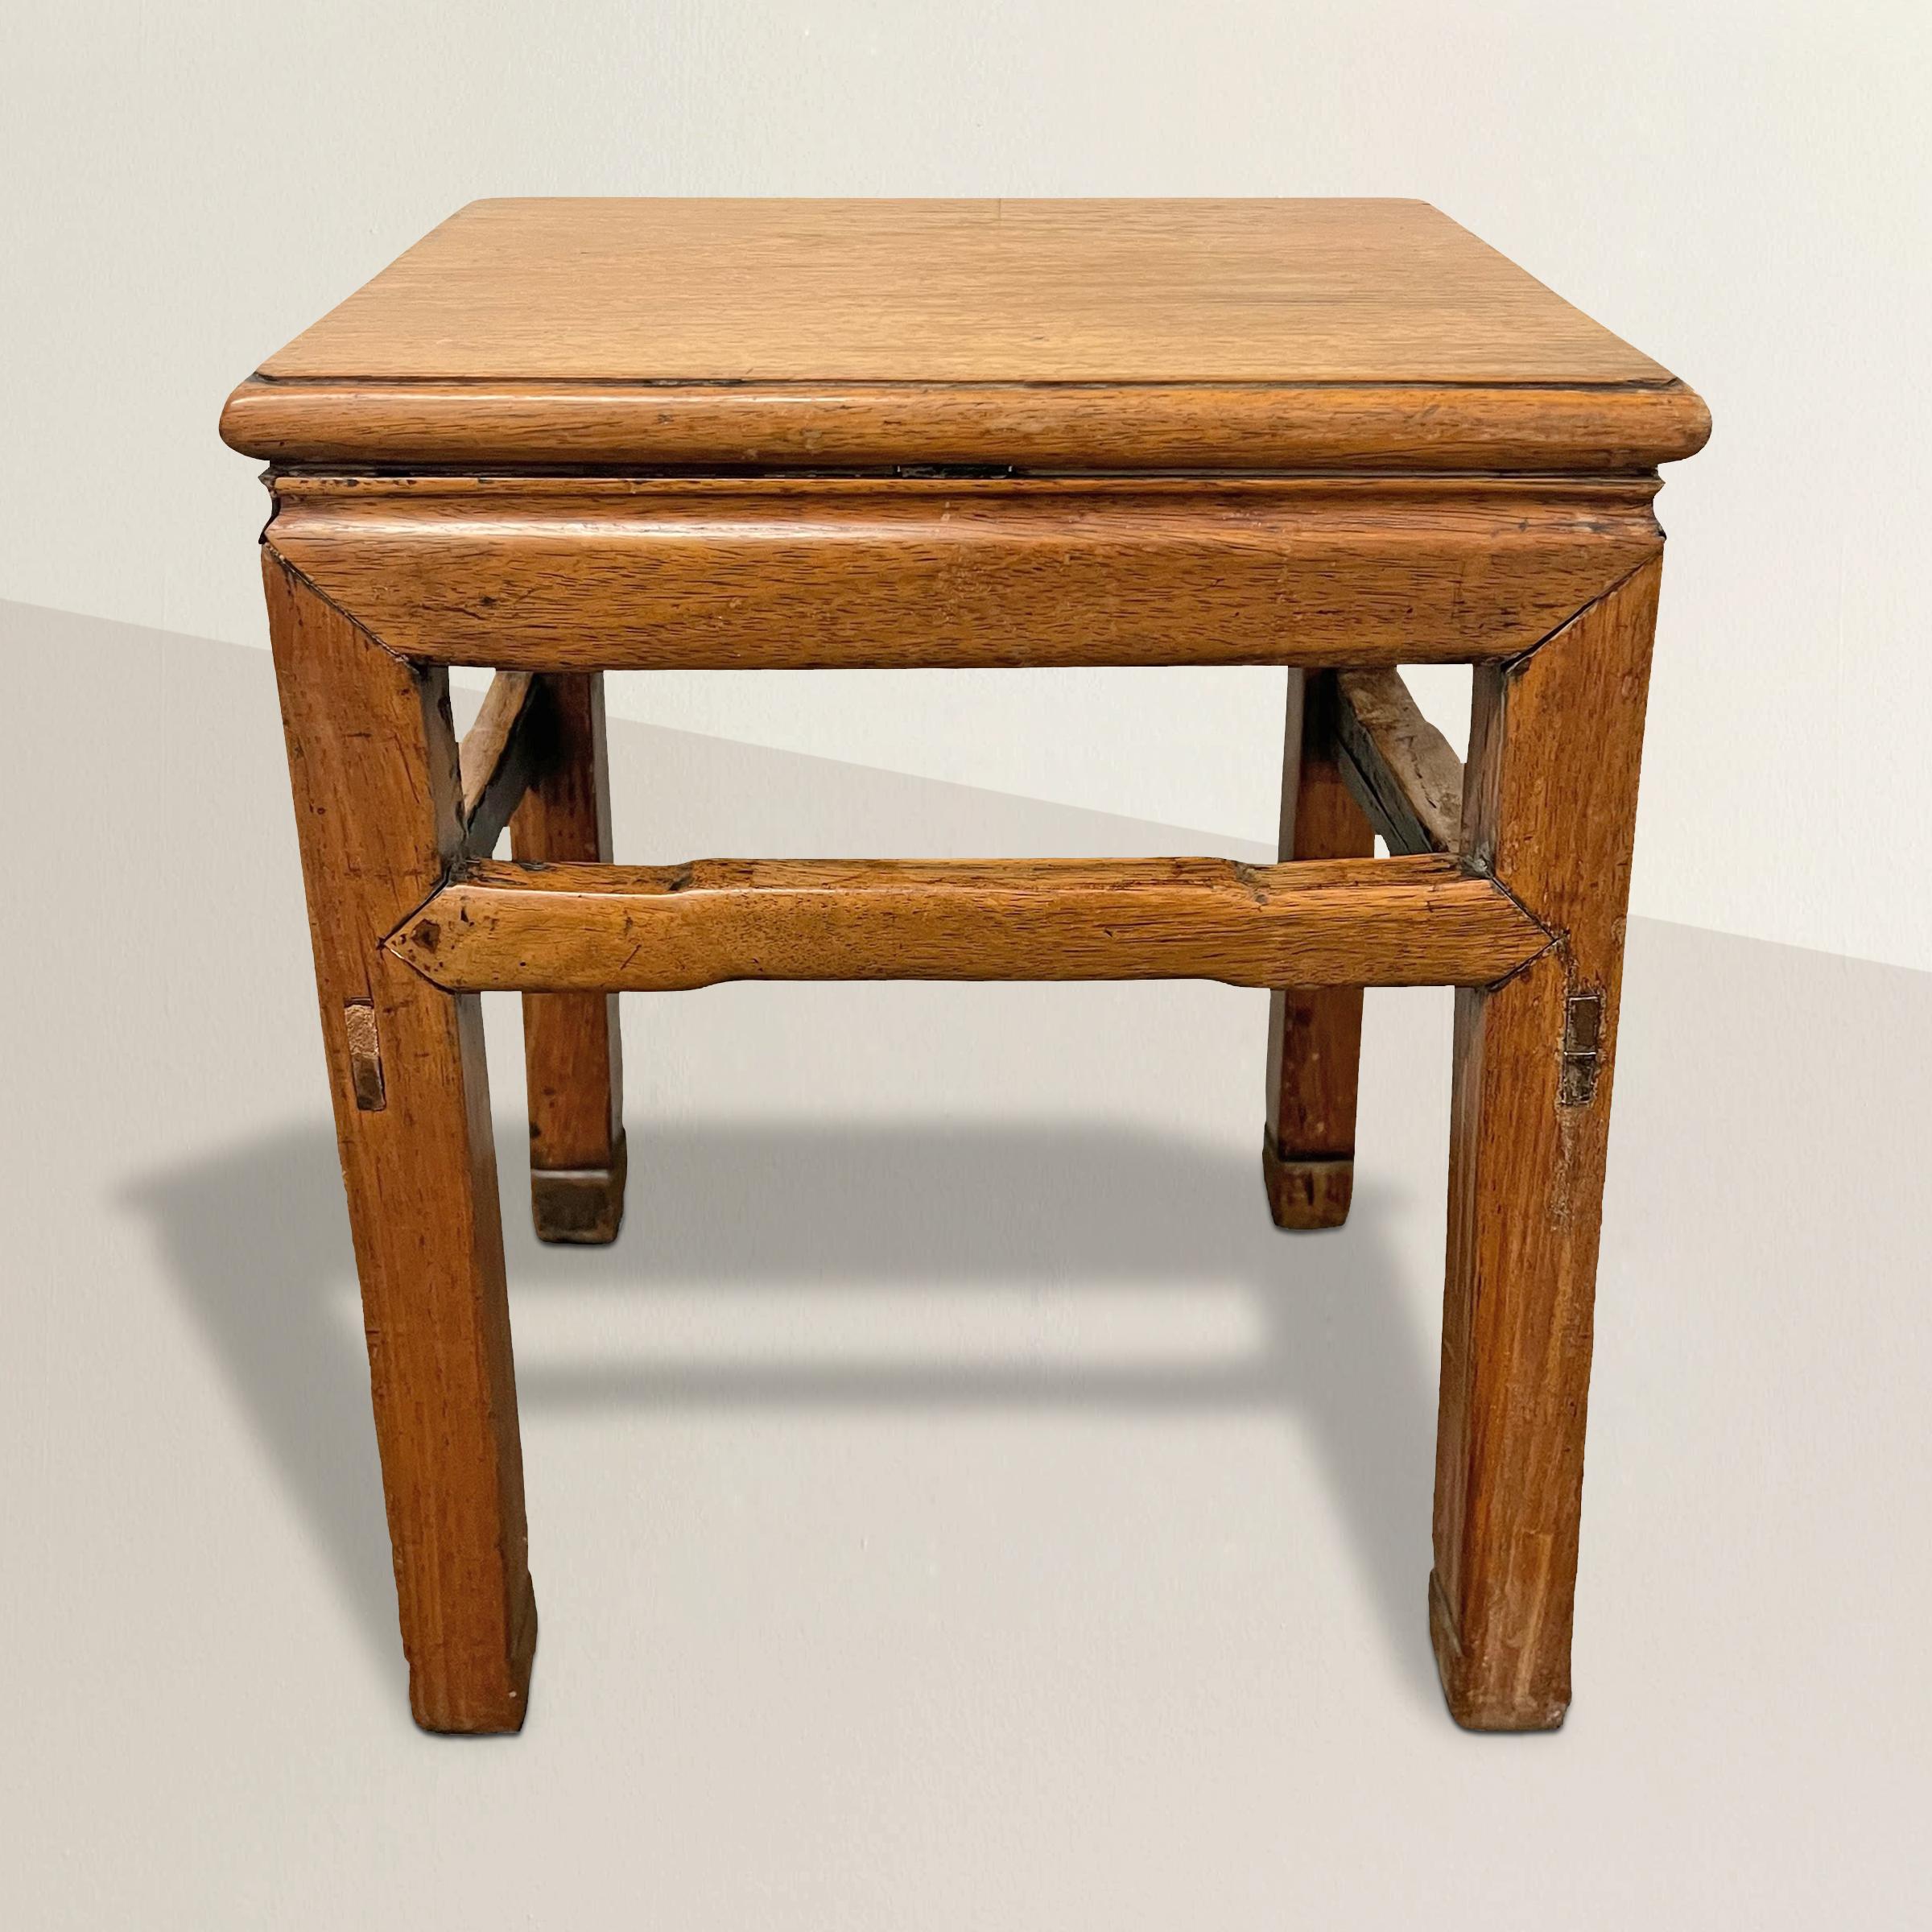 Dating back to the late 17th or early 18th century during China's Qing dynasty, this exquisite Ming-style huanghuali scholar's stool epitomizes the pinnacle of traditional Chinese craftsmanship. Crafted from rare and revered huanghuali wood,